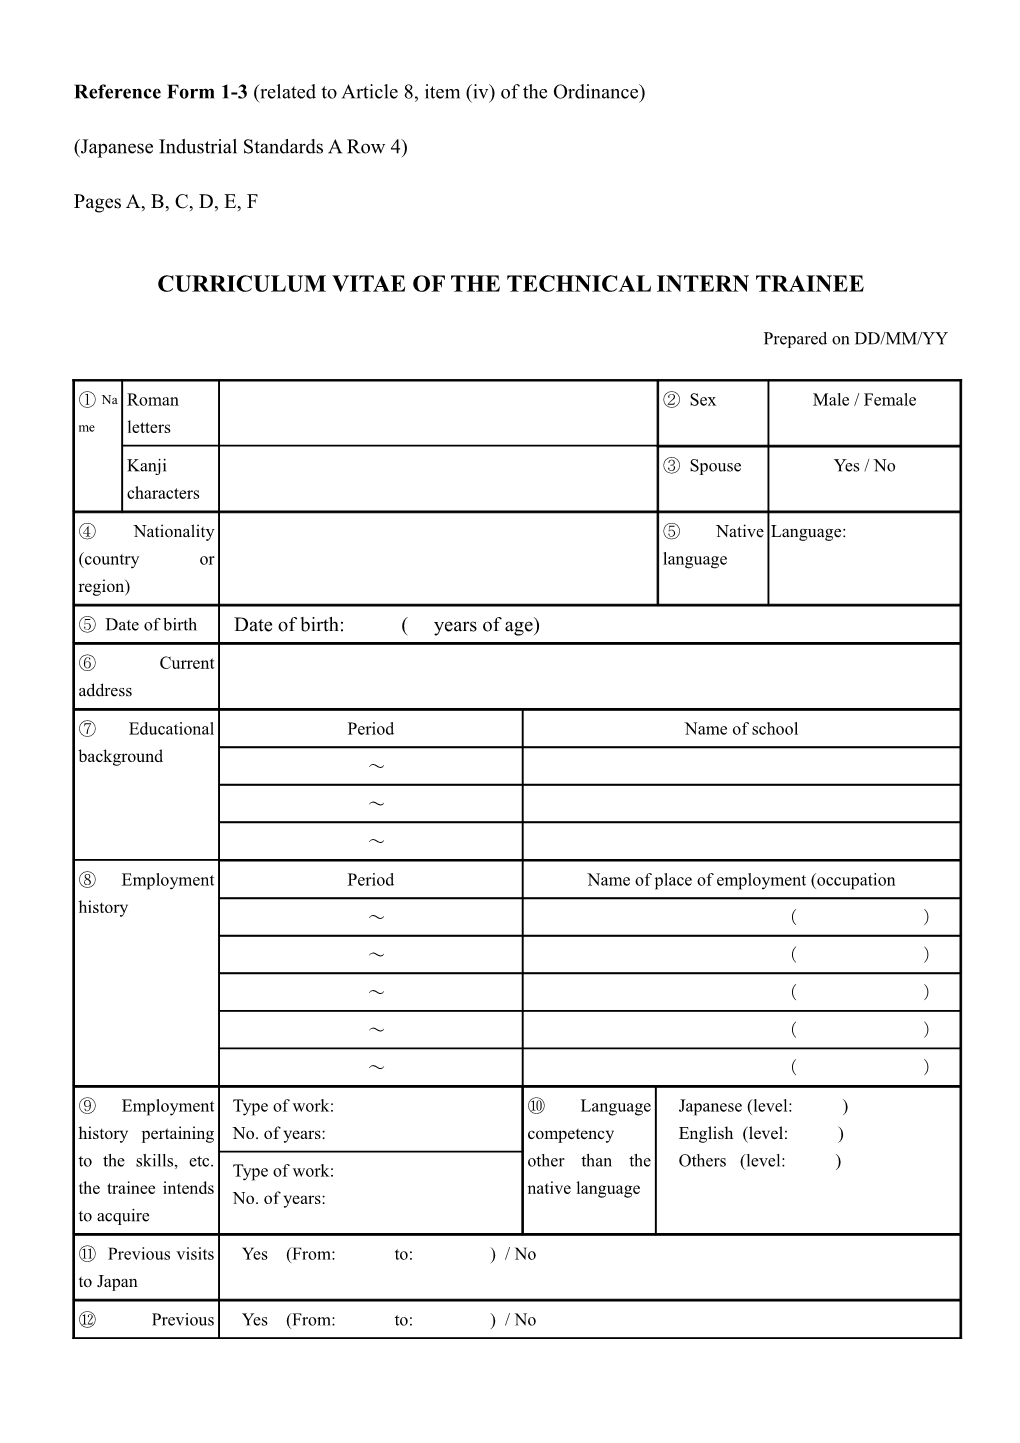 Reference Form 1-3 (Related to Article 8, Item (Iv) of the Ordinance)